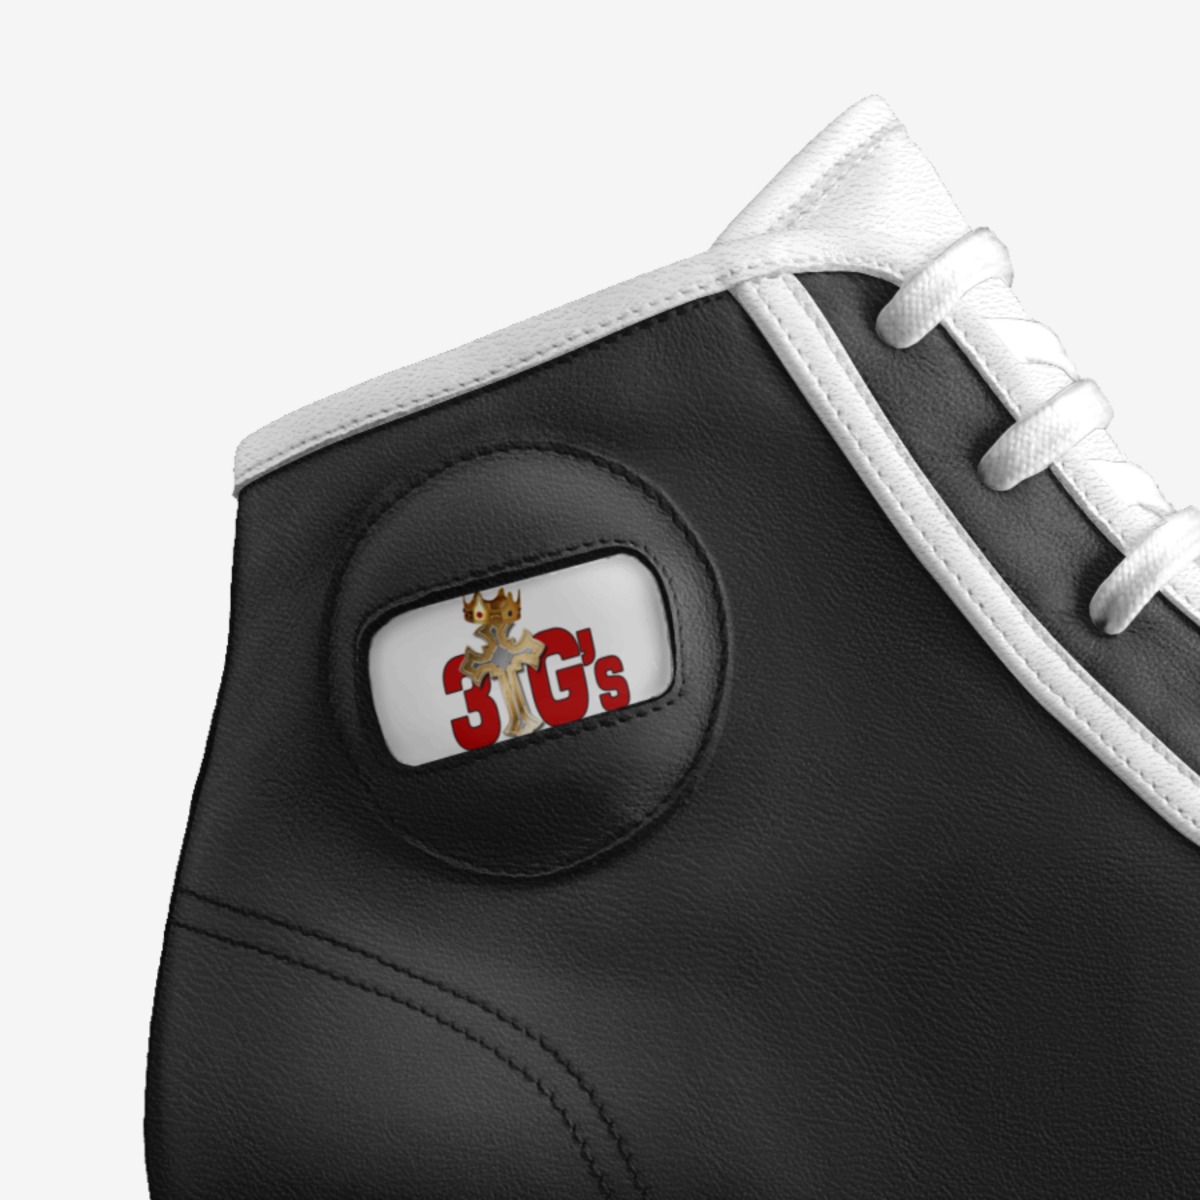 midler Egenskab Styrke The 3Gs | A Custom Shoe concept by Randy Smith